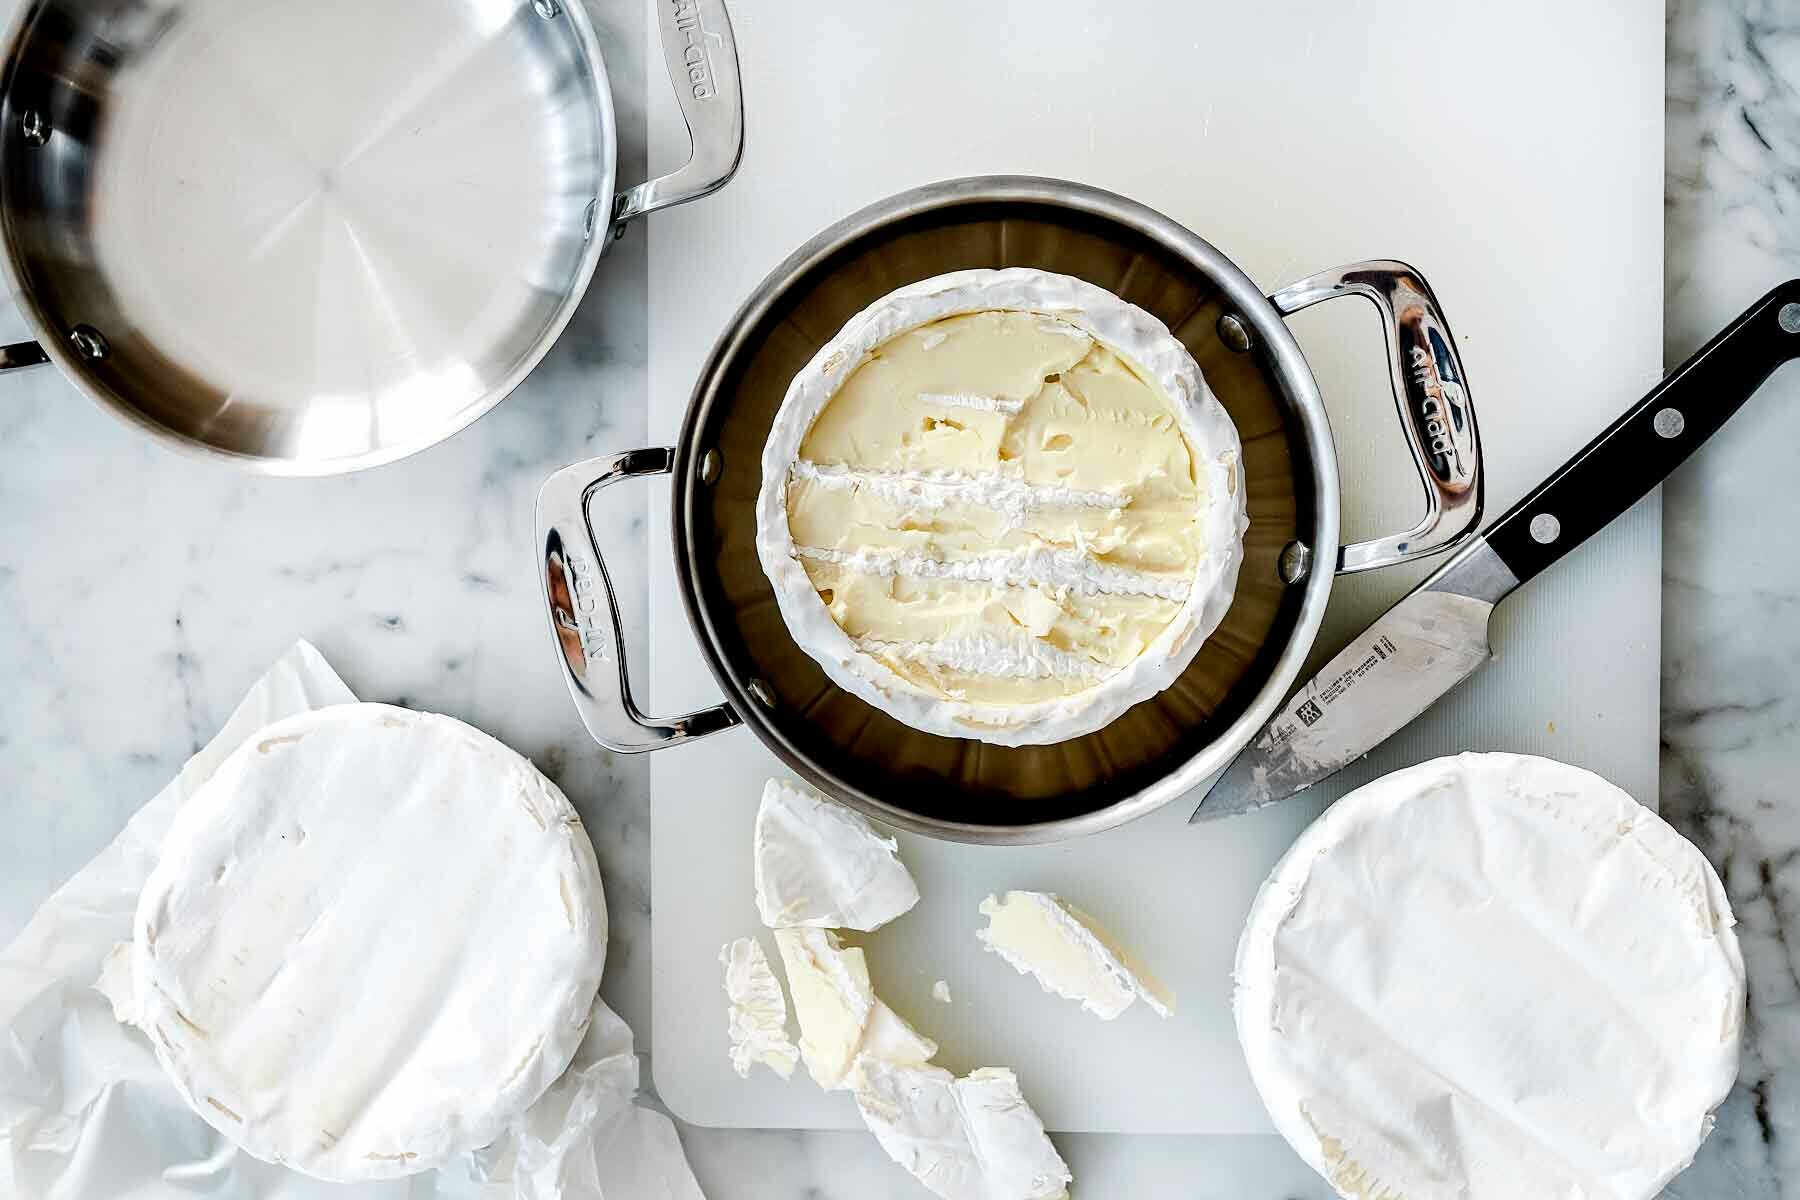 https://www.foodiecrush.com/easy-baked-brie-recipe/baked-brie-foodiecrush-com-008/